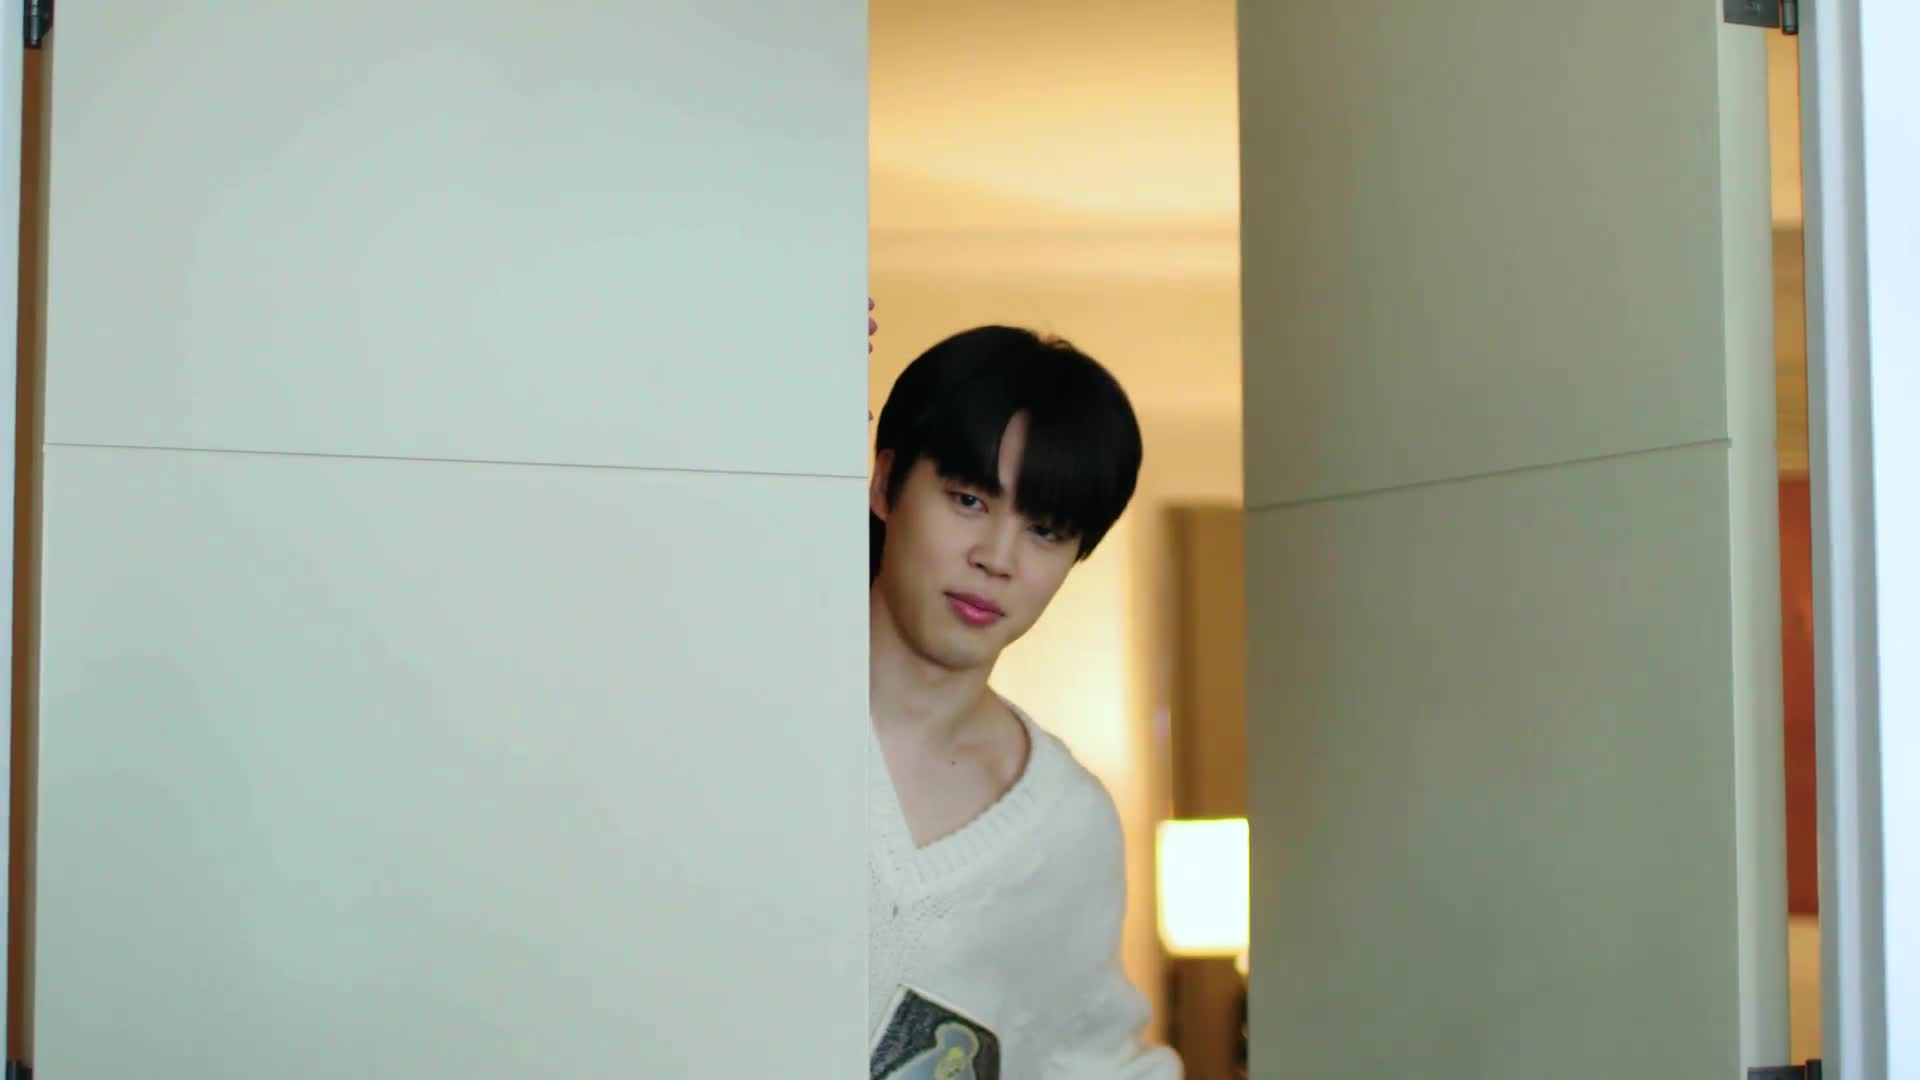 Watch Vogue Meets BTS's Jimin for a Jaunt Around Manhattan, 24 Hours With